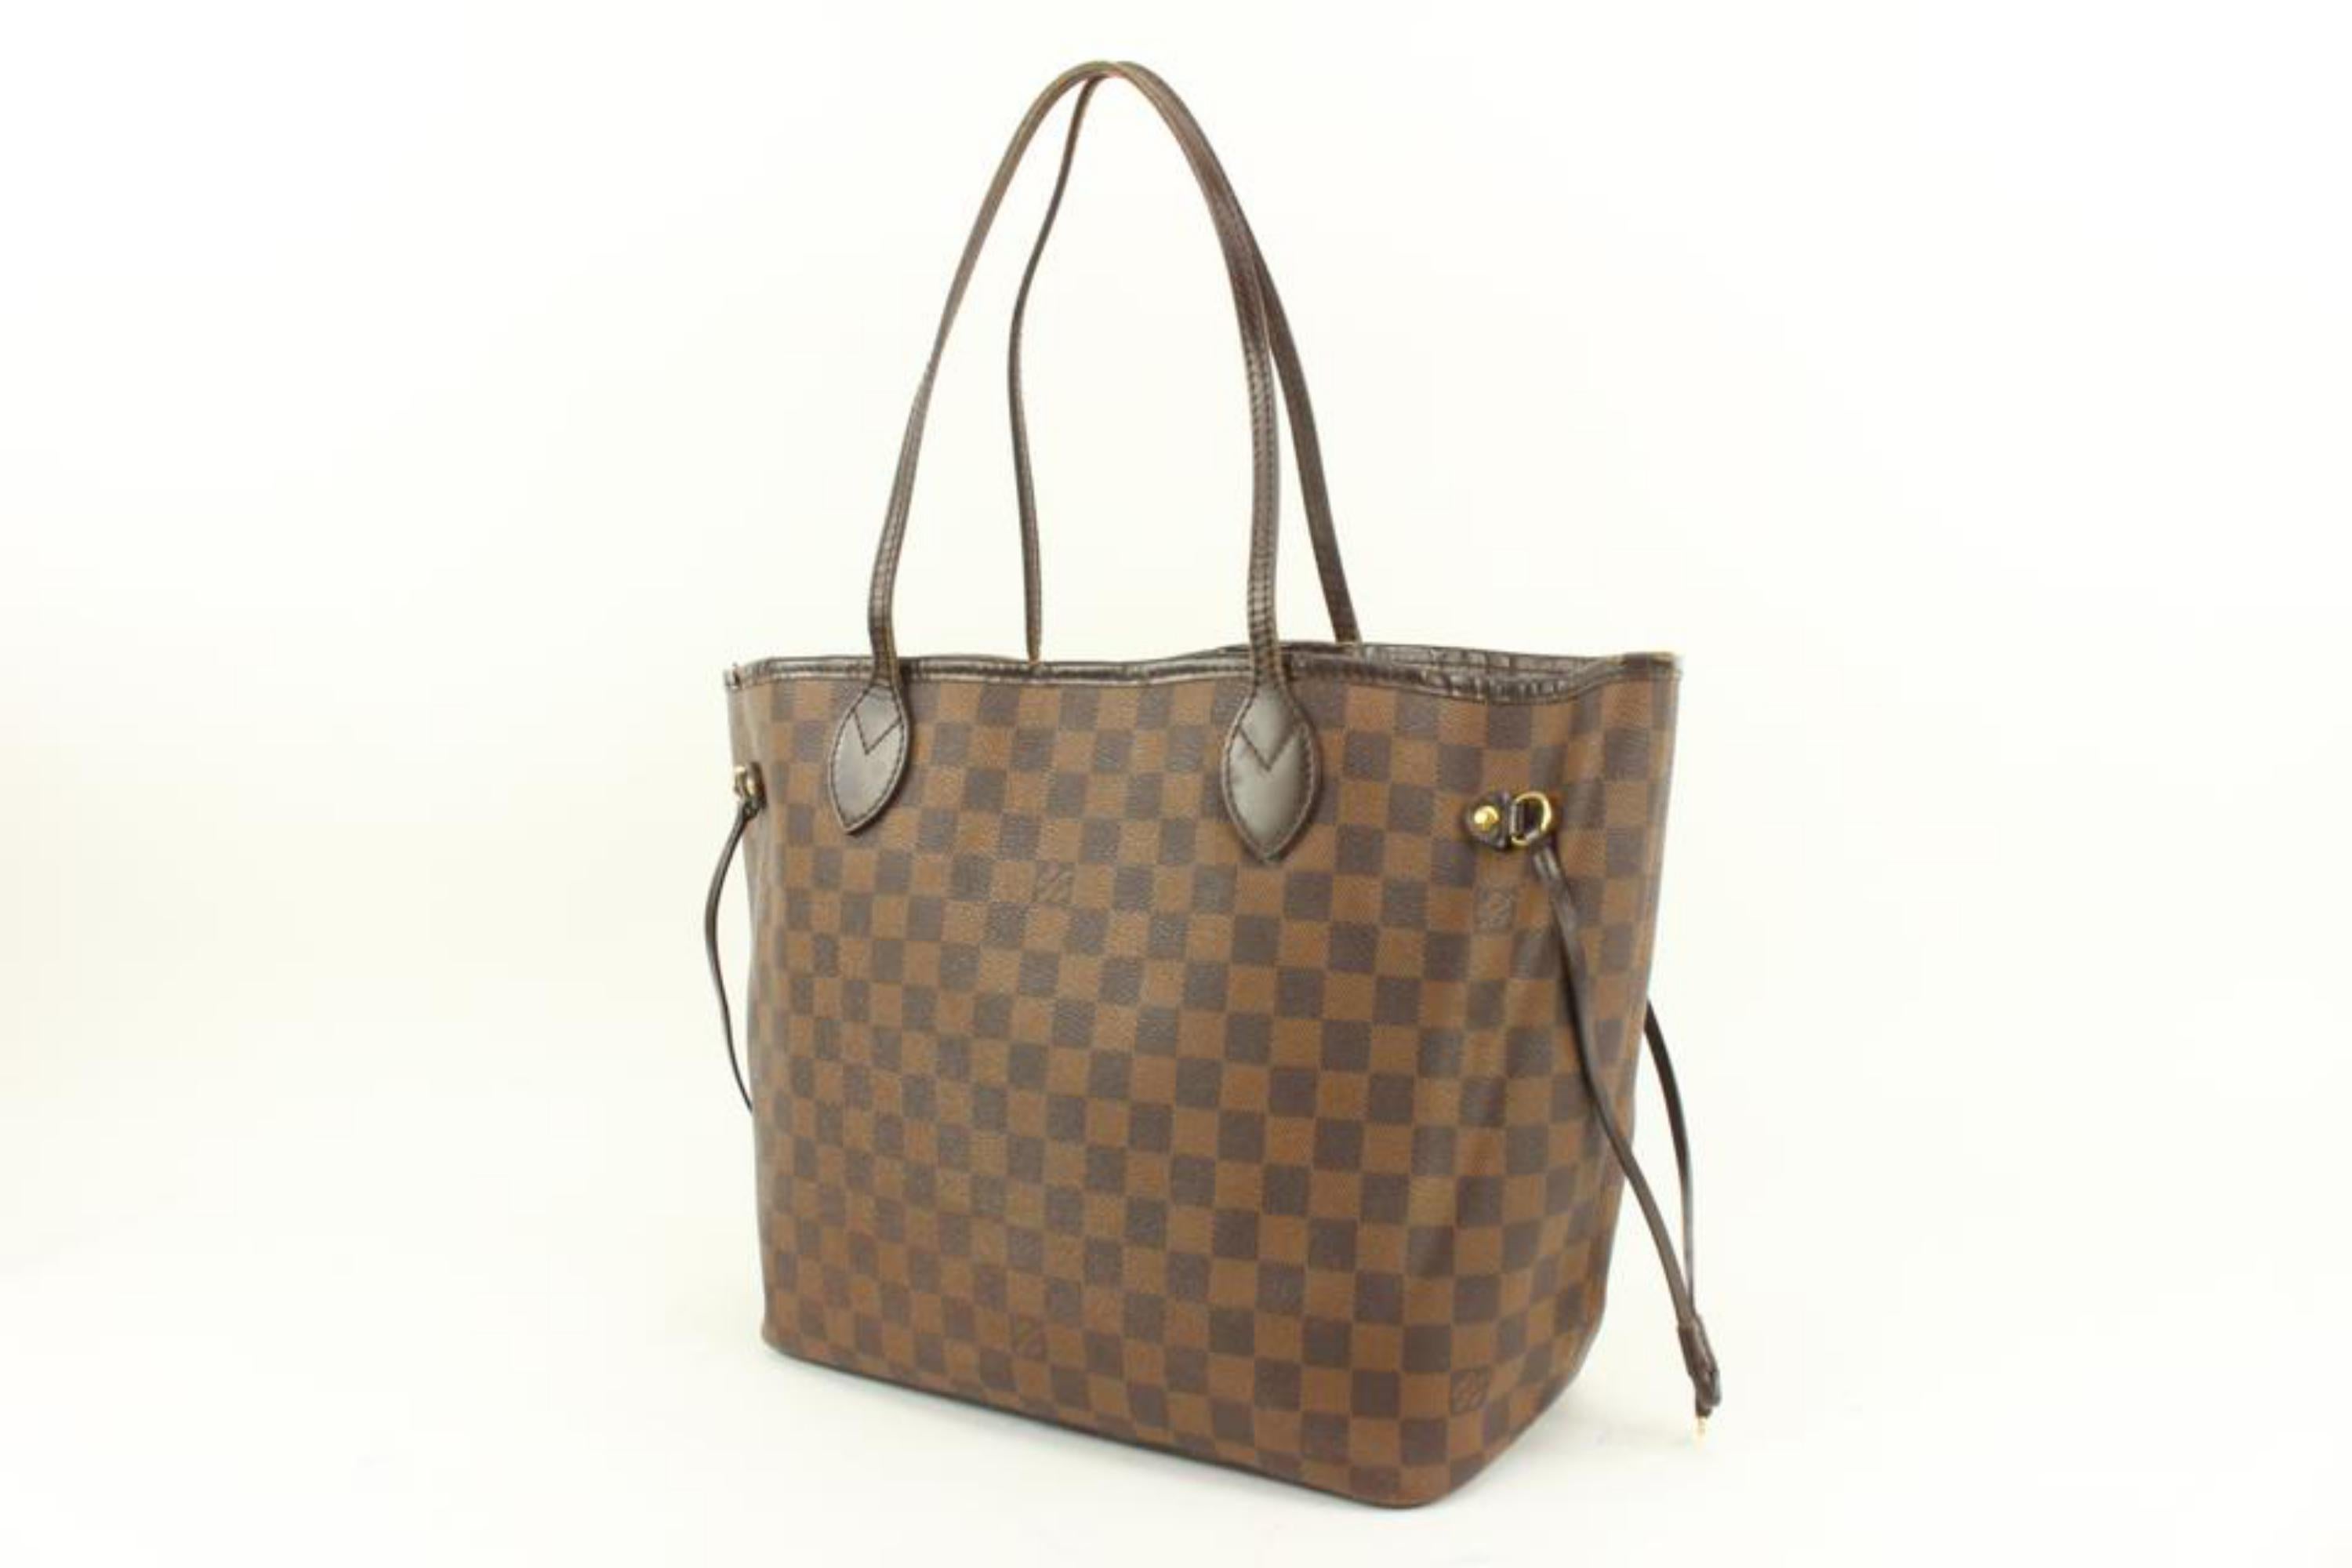 Louis Vuitton Damier Ebene Neverfull MM Tote Bag 88lv39s
Date Code/Serial Number: AR3089
Made In: France
Measurements: Length:  18.5